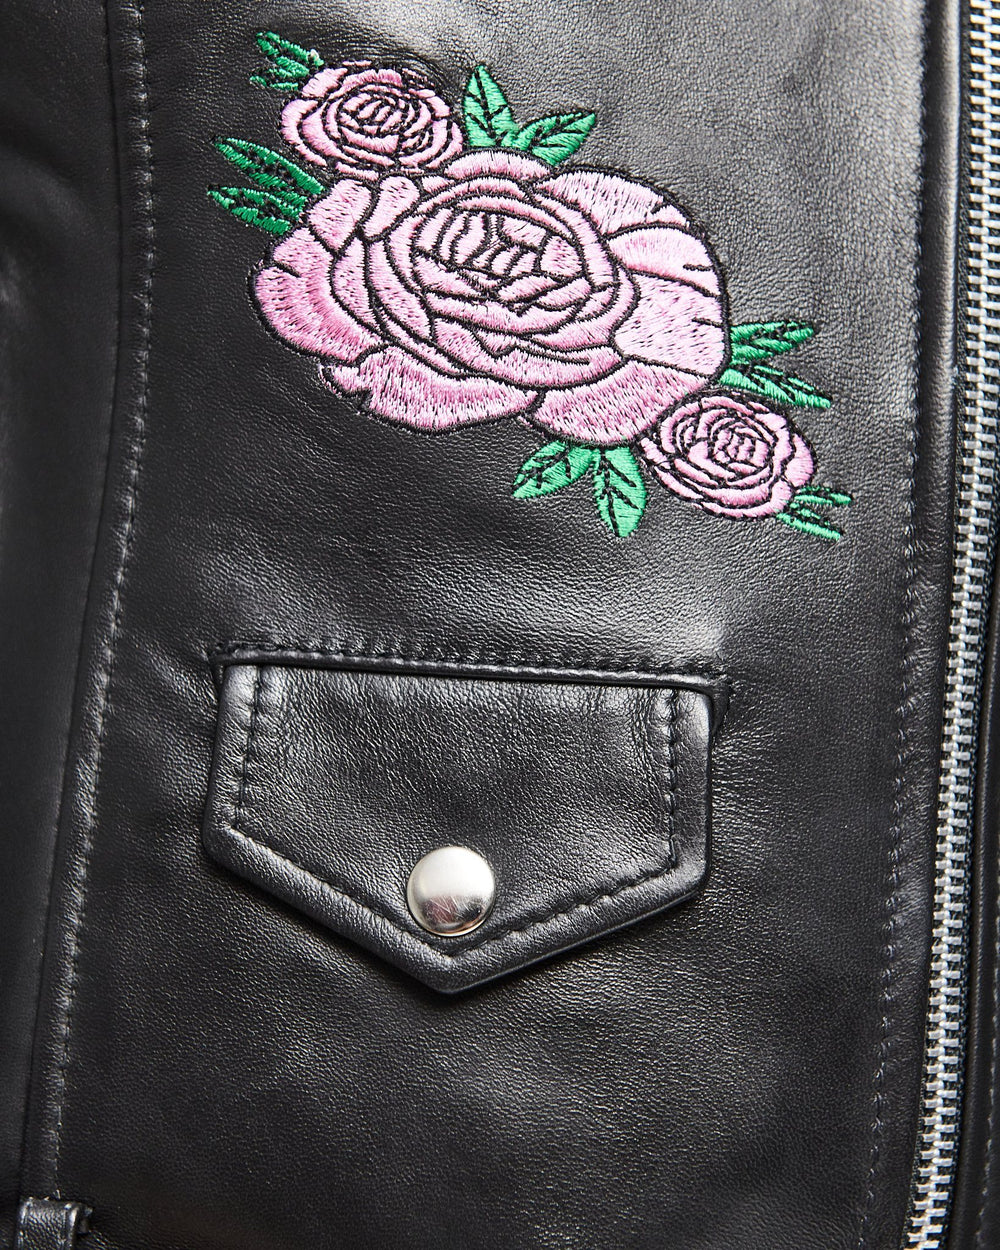 MODERN VICE EMBROIDERED MOTO JACKET